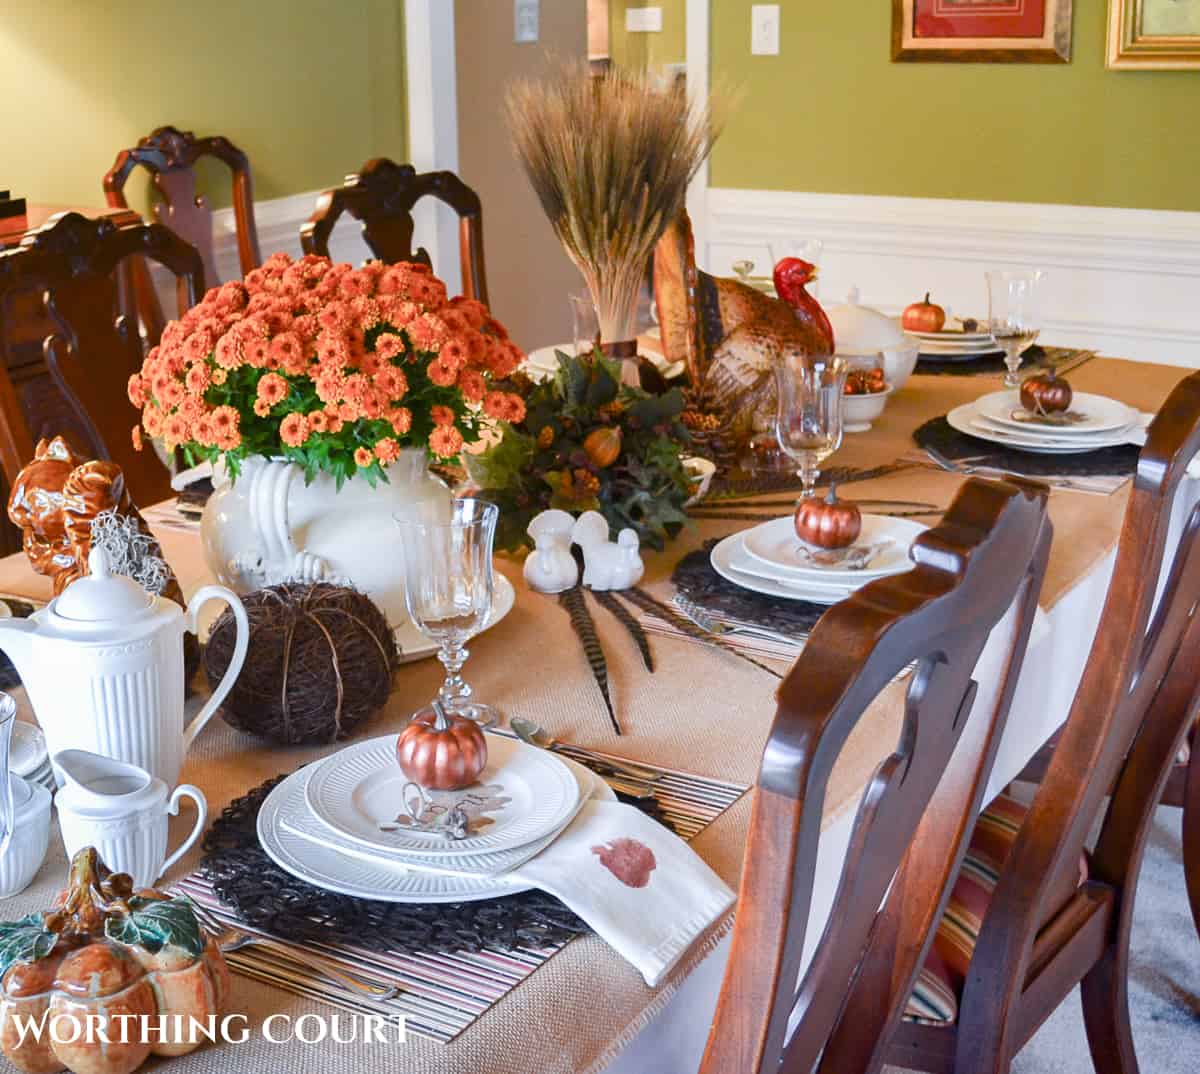 Woodland themed Thanksgiving table setting with fall colored mums, a cornucopia, ceramic squirrel and white dishes